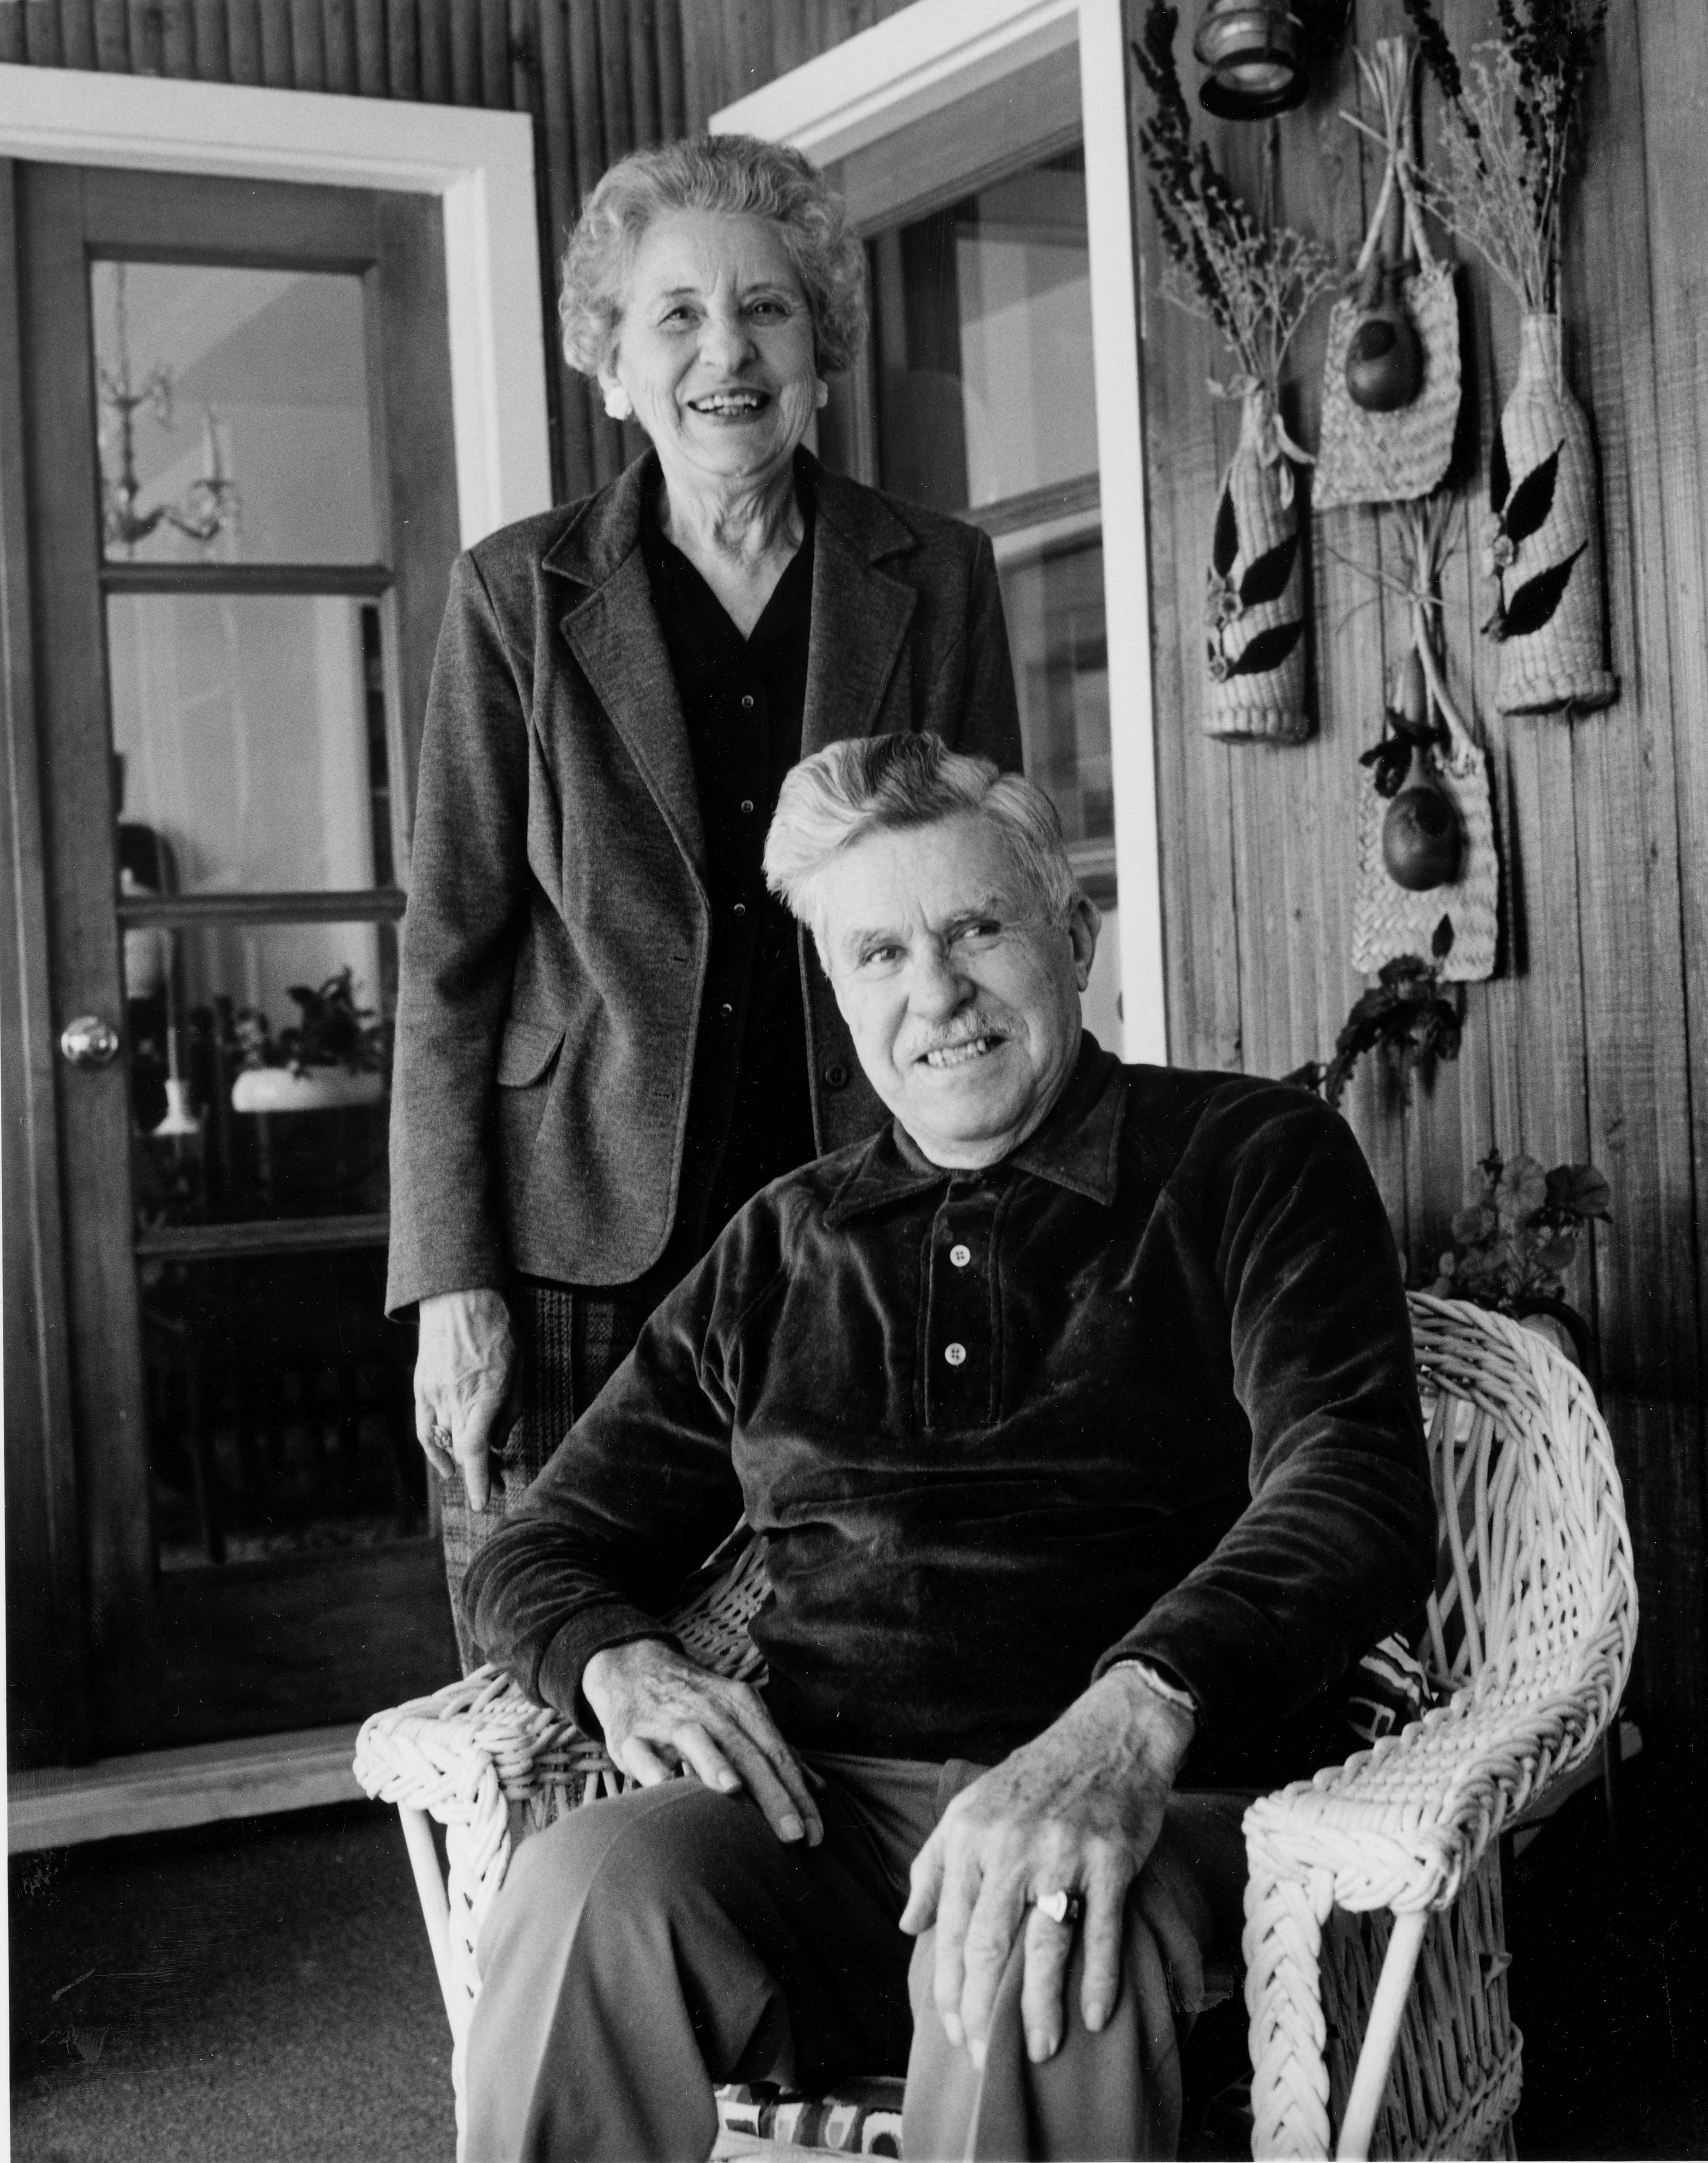 Man sitting and woman standing posing for a photo in their home